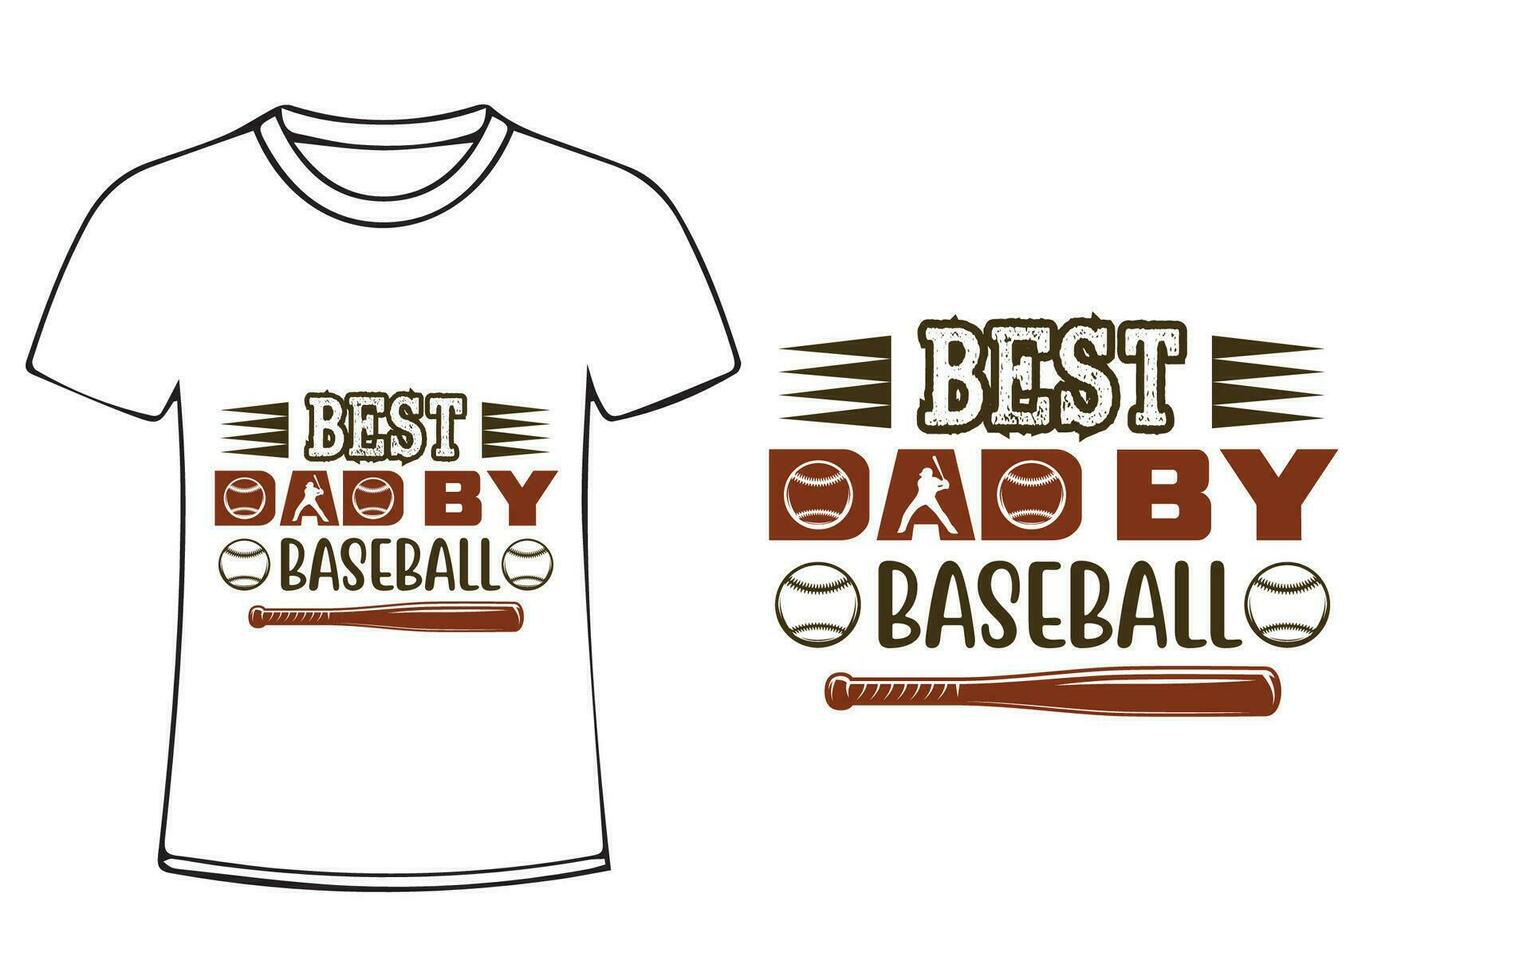 baseball quote my new typography design for t-shirt, cards, frame artwork, bags, mugs, stickers, tumblers, phone cases, print etc. vector